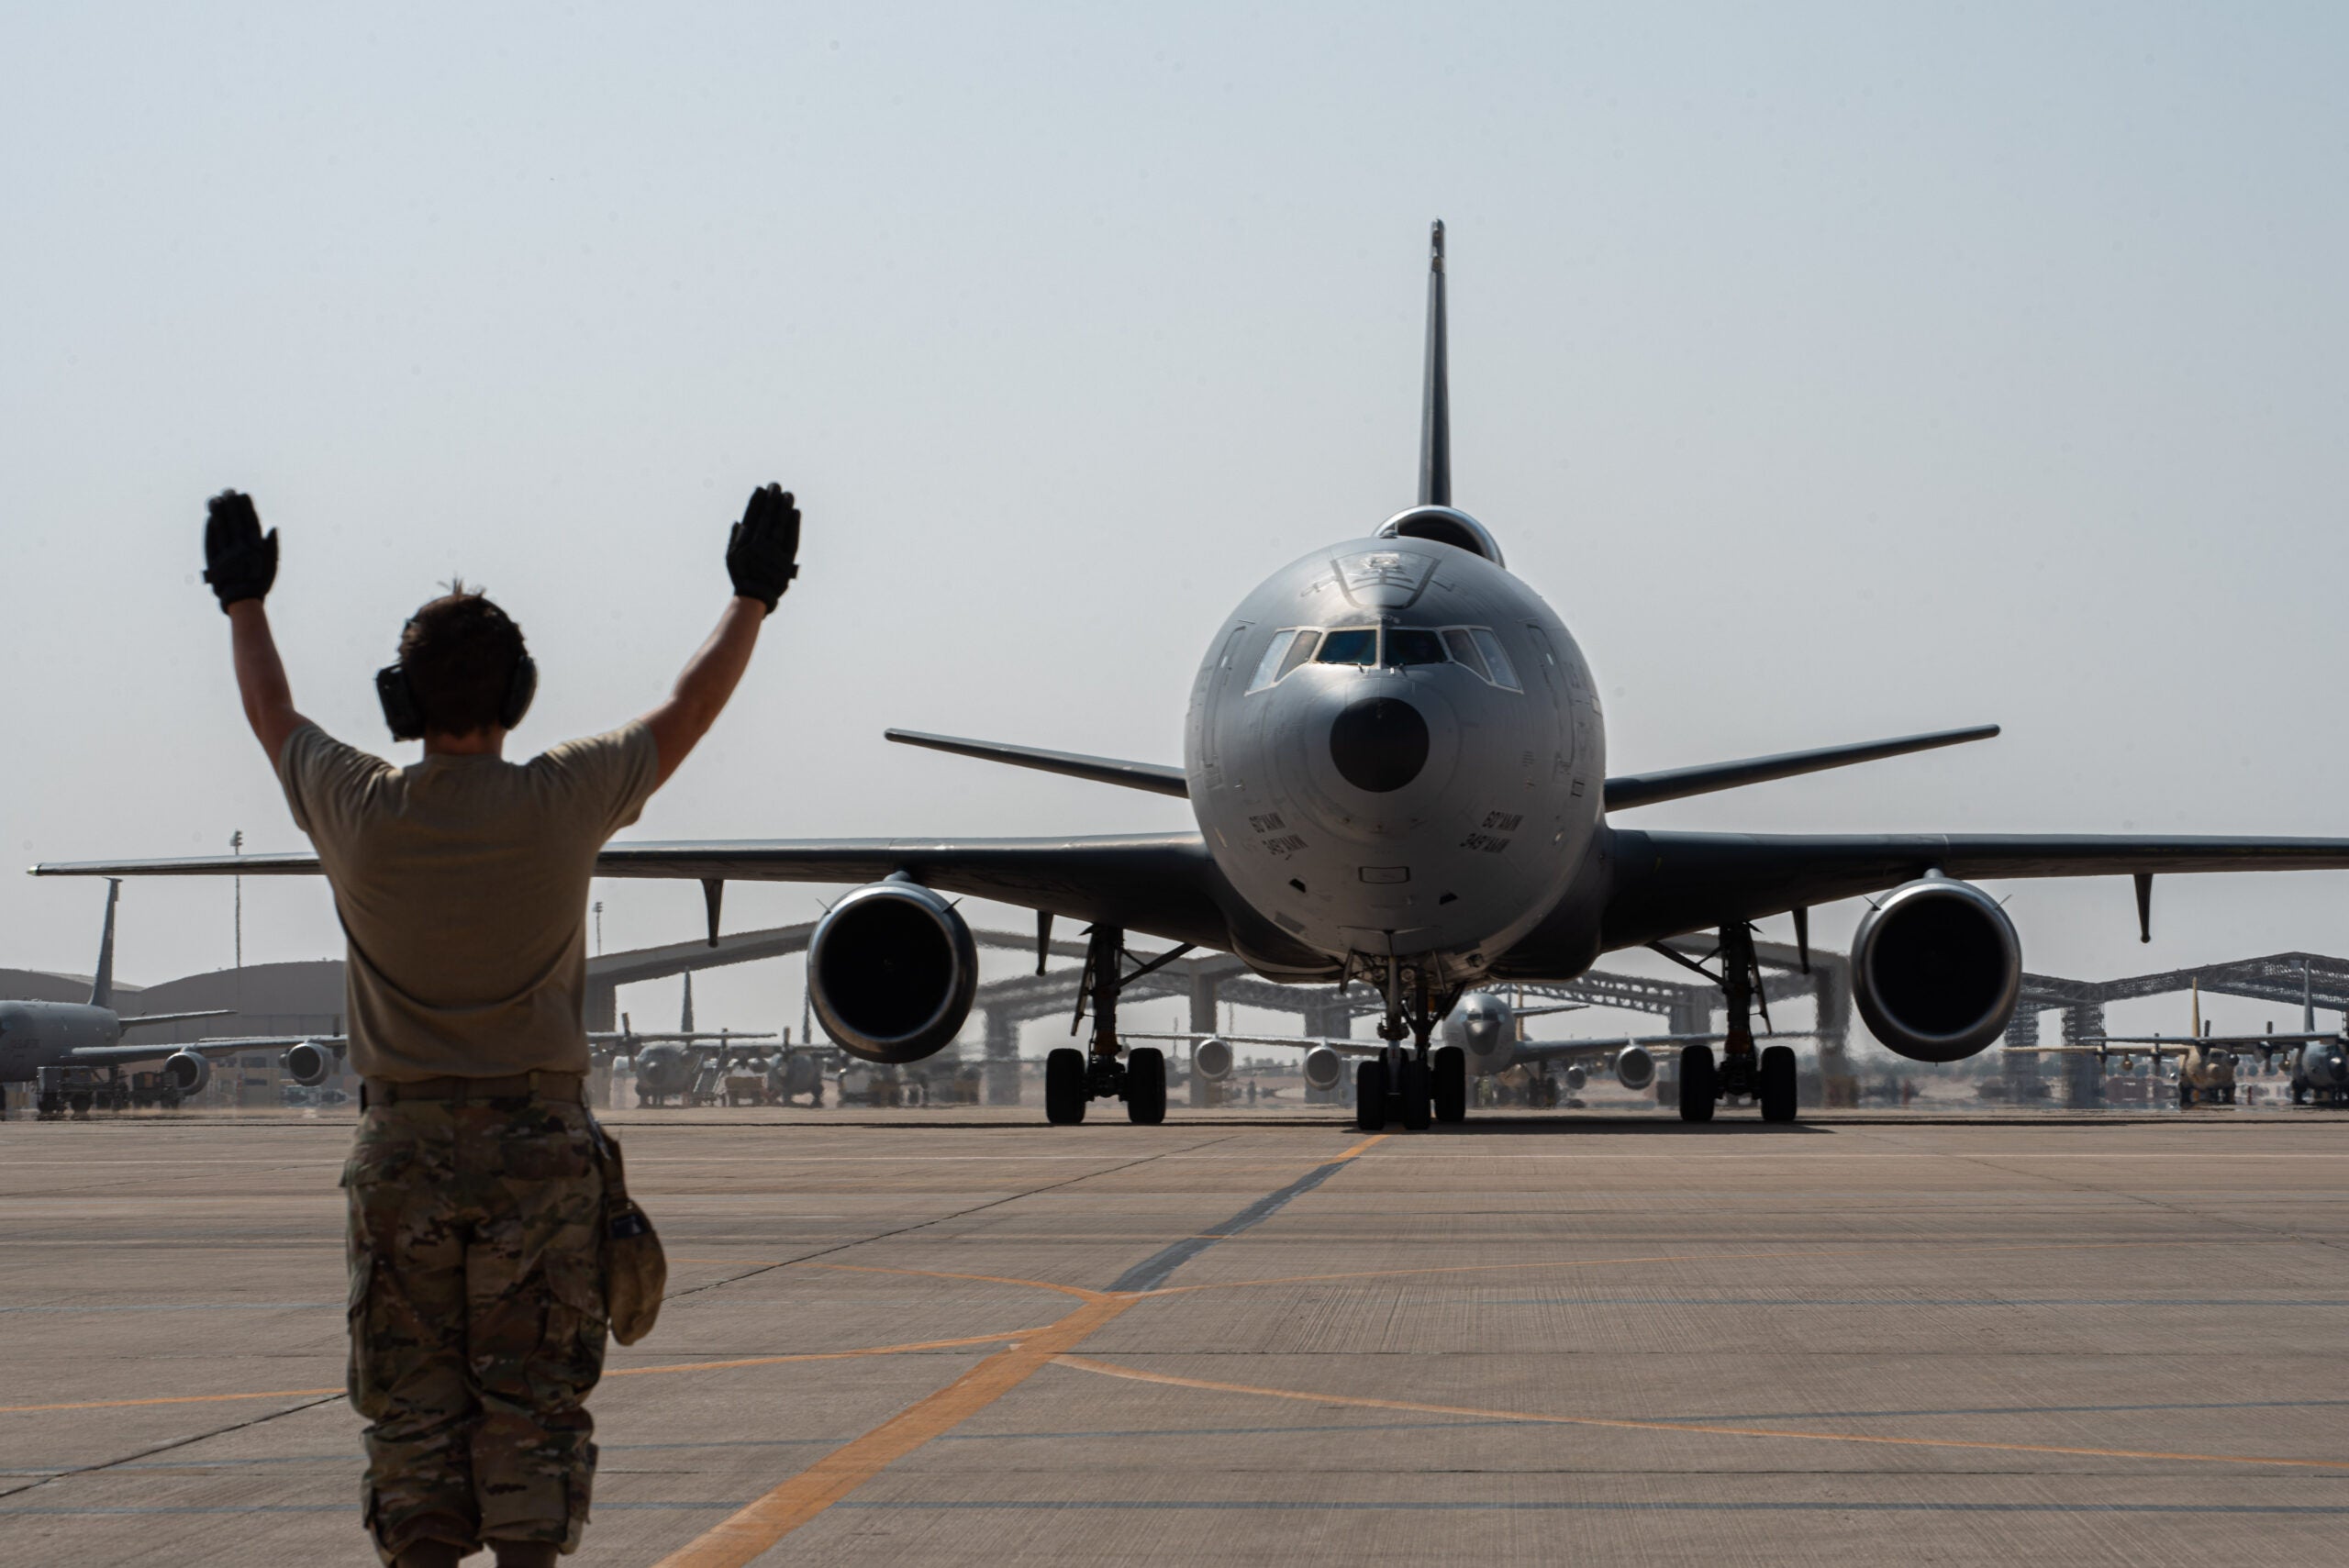 A U.S. Airman from the 378th Expeditionary Aircraft Maintenance Squadron directs a taxiing KC-10 Extender assigned to the 908th Air Refueling Squadron after the aircraft returned from the airframe's final combat sortie on Prince Sultan Air Base, Oct. 3, 2023. The flight served as a capstone for the KC-10 after over 30 years of service within the U.S. Air Forces Central (AFCENT) Area of Responsibility. By September 2024, the U.S. Air Force's fleet of KC-10s will be decommissioned and gradually replaced by the KC-46 aircraft. (U.S. Air Force photo by Tech. Sgt. Alexander Frank)